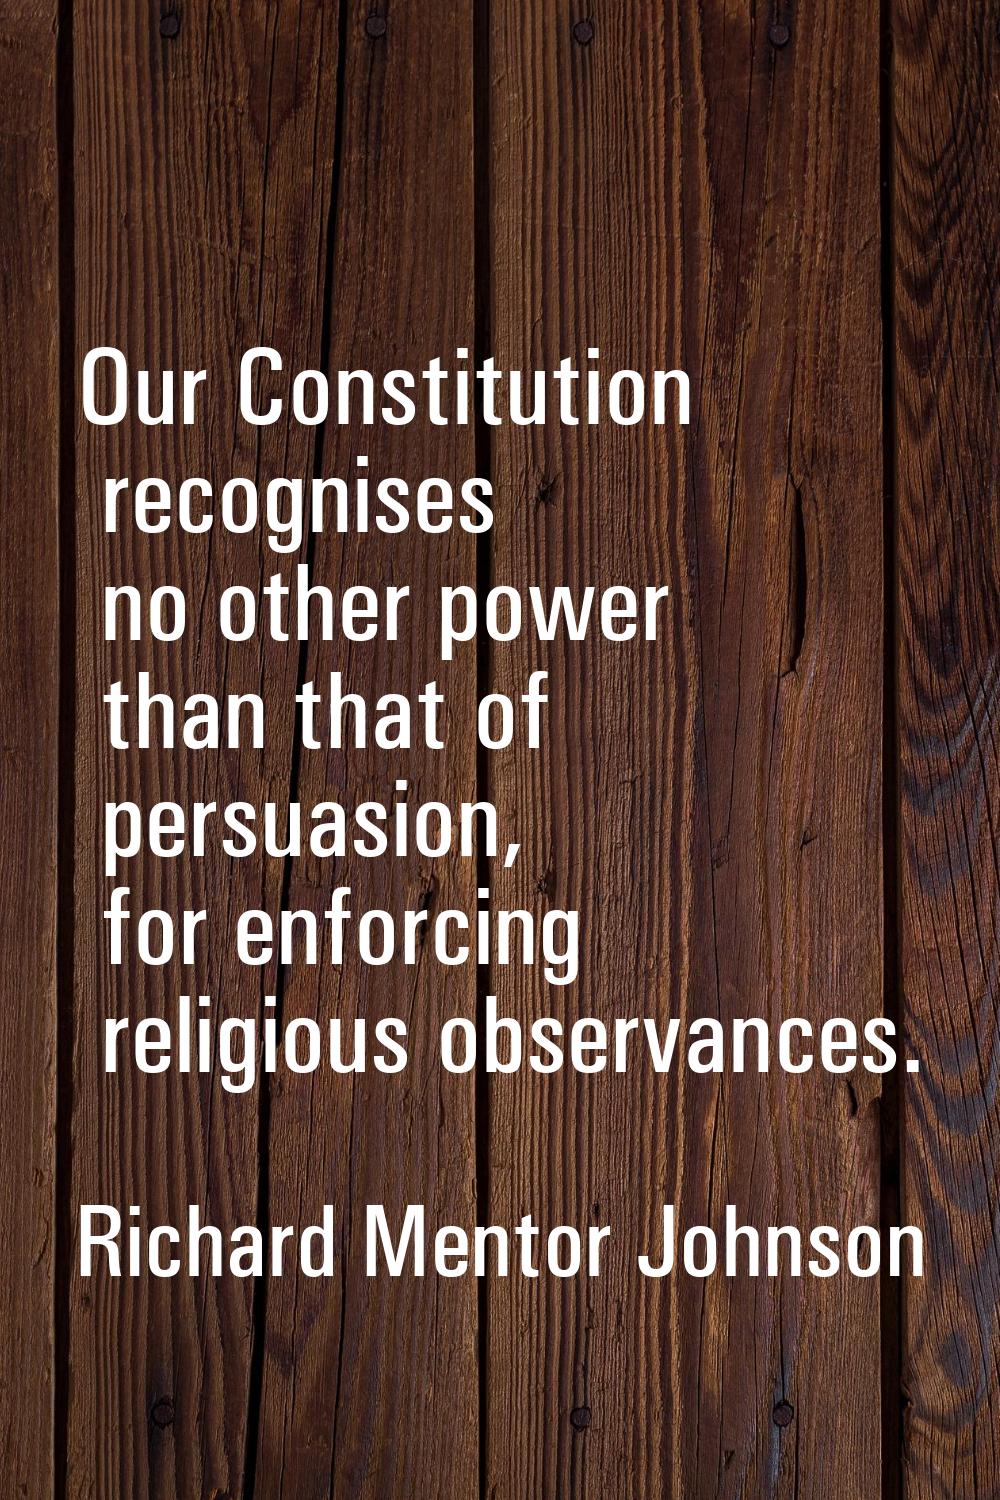 Our Constitution recognises no other power than that of persuasion, for enforcing religious observa